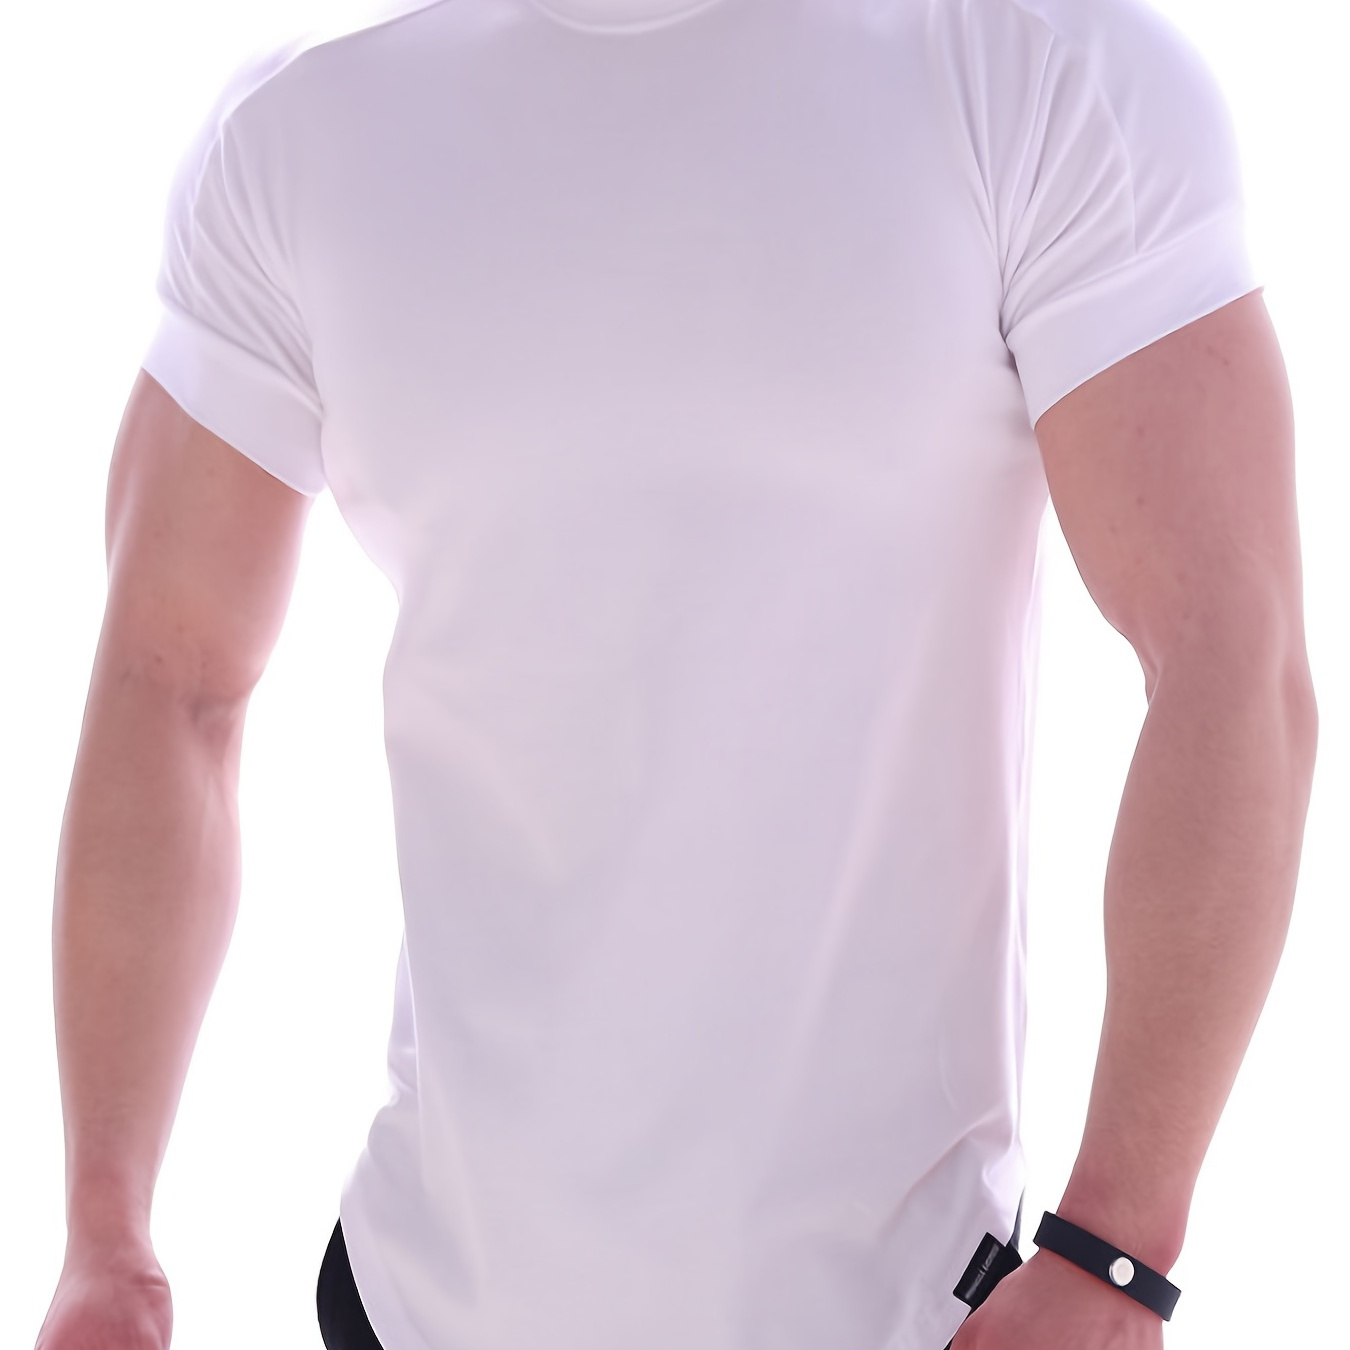 

Breathable Men's Compression Sport T-shirt For Fitness Training And Running